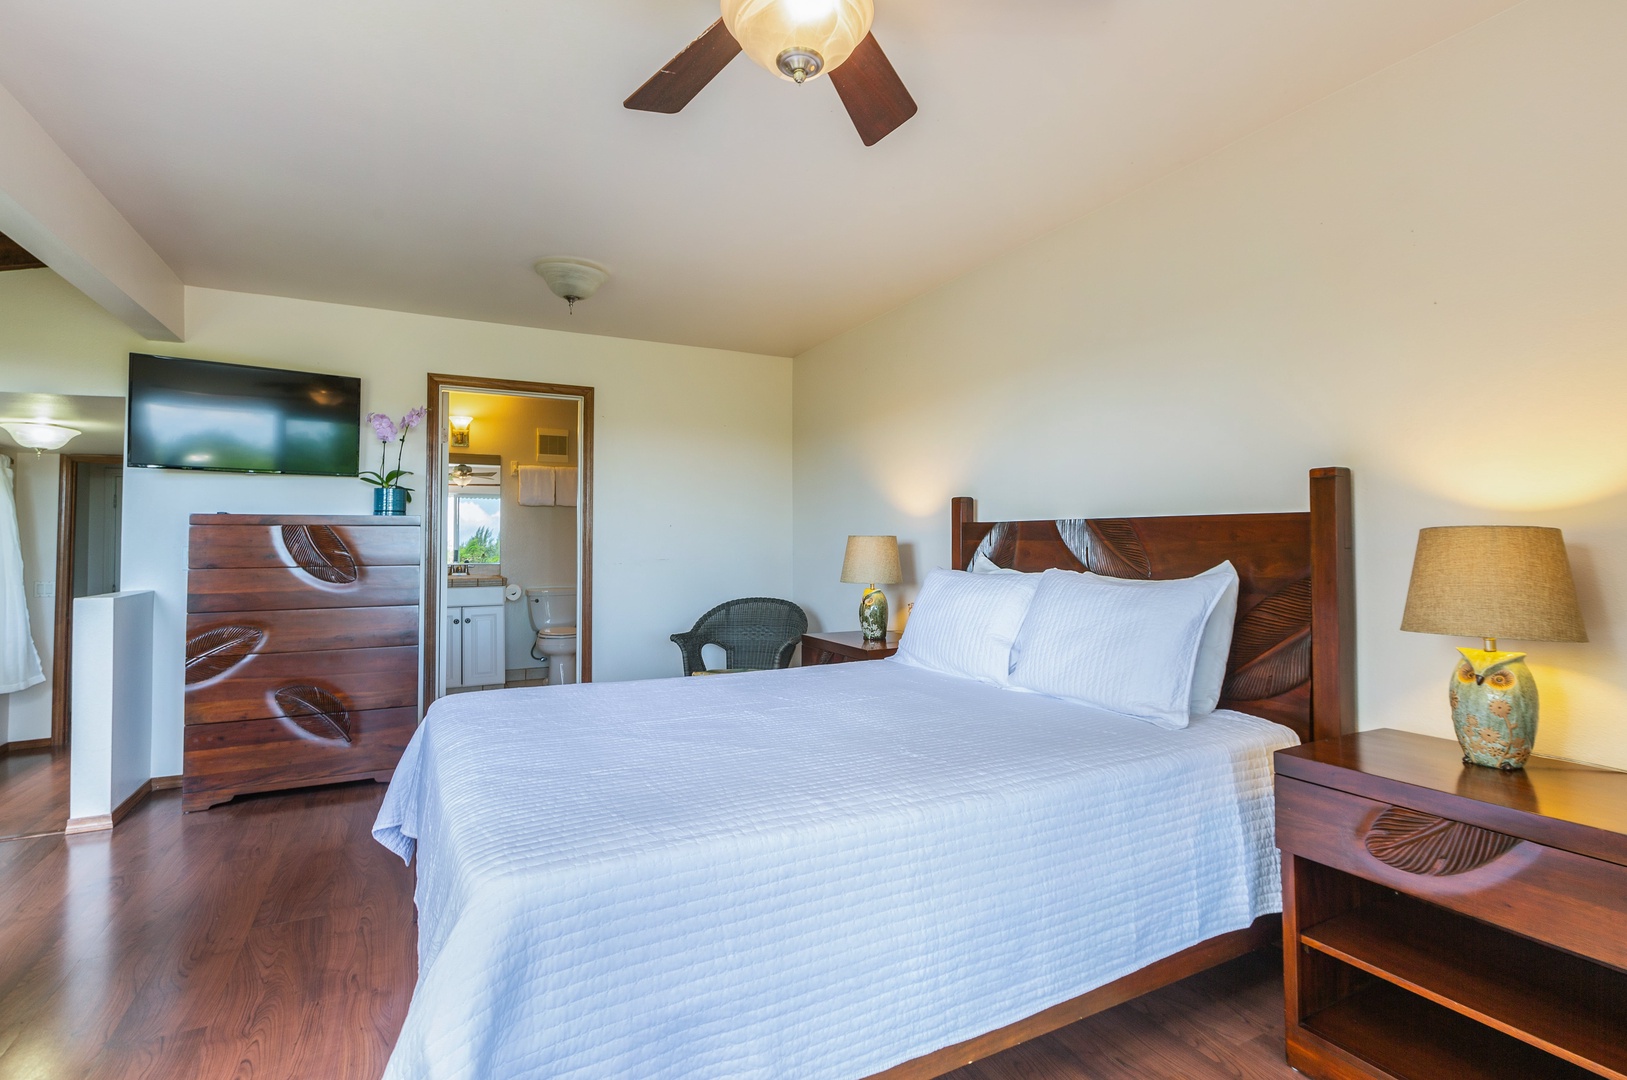 Princeville Vacation Rentals, Hale Ohia - Guest Bedroom 6 has a queen bed and ceiling fan